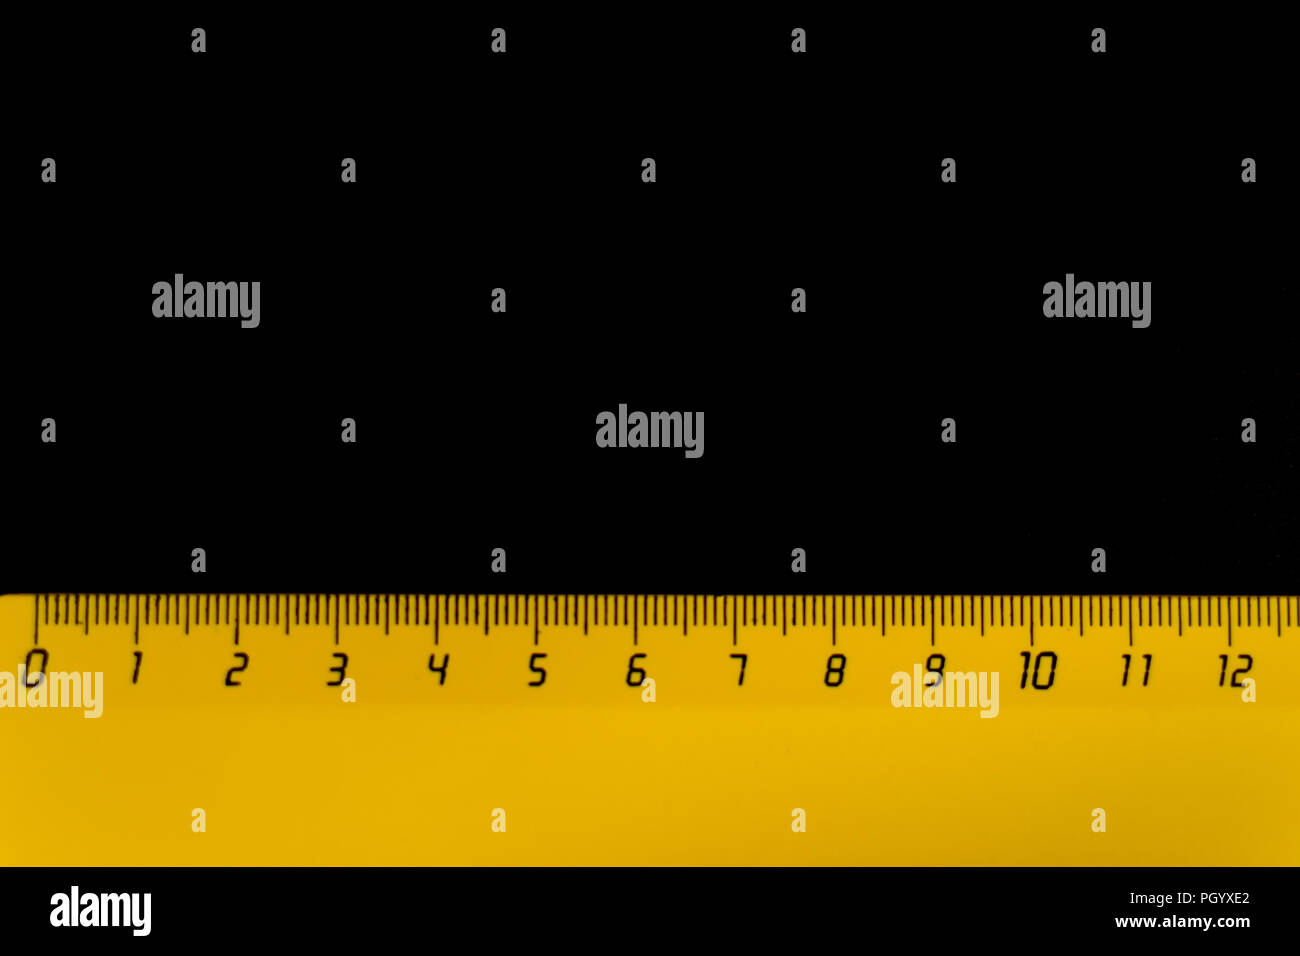 yellow ruler on a black background 12 centimeters Stock Photo